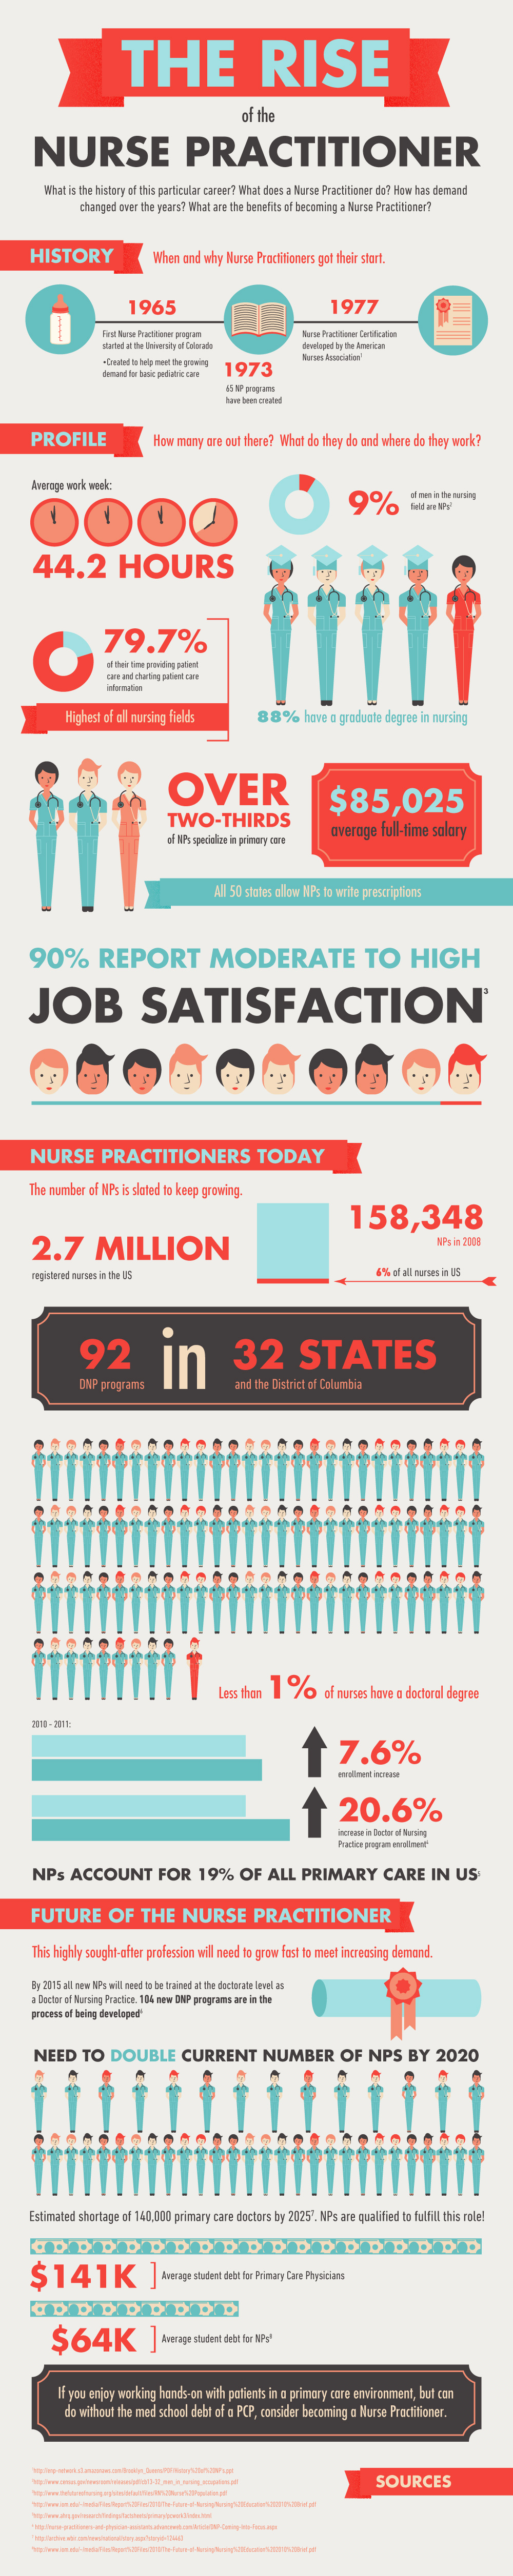 The Rise of the Nurse Practitioner